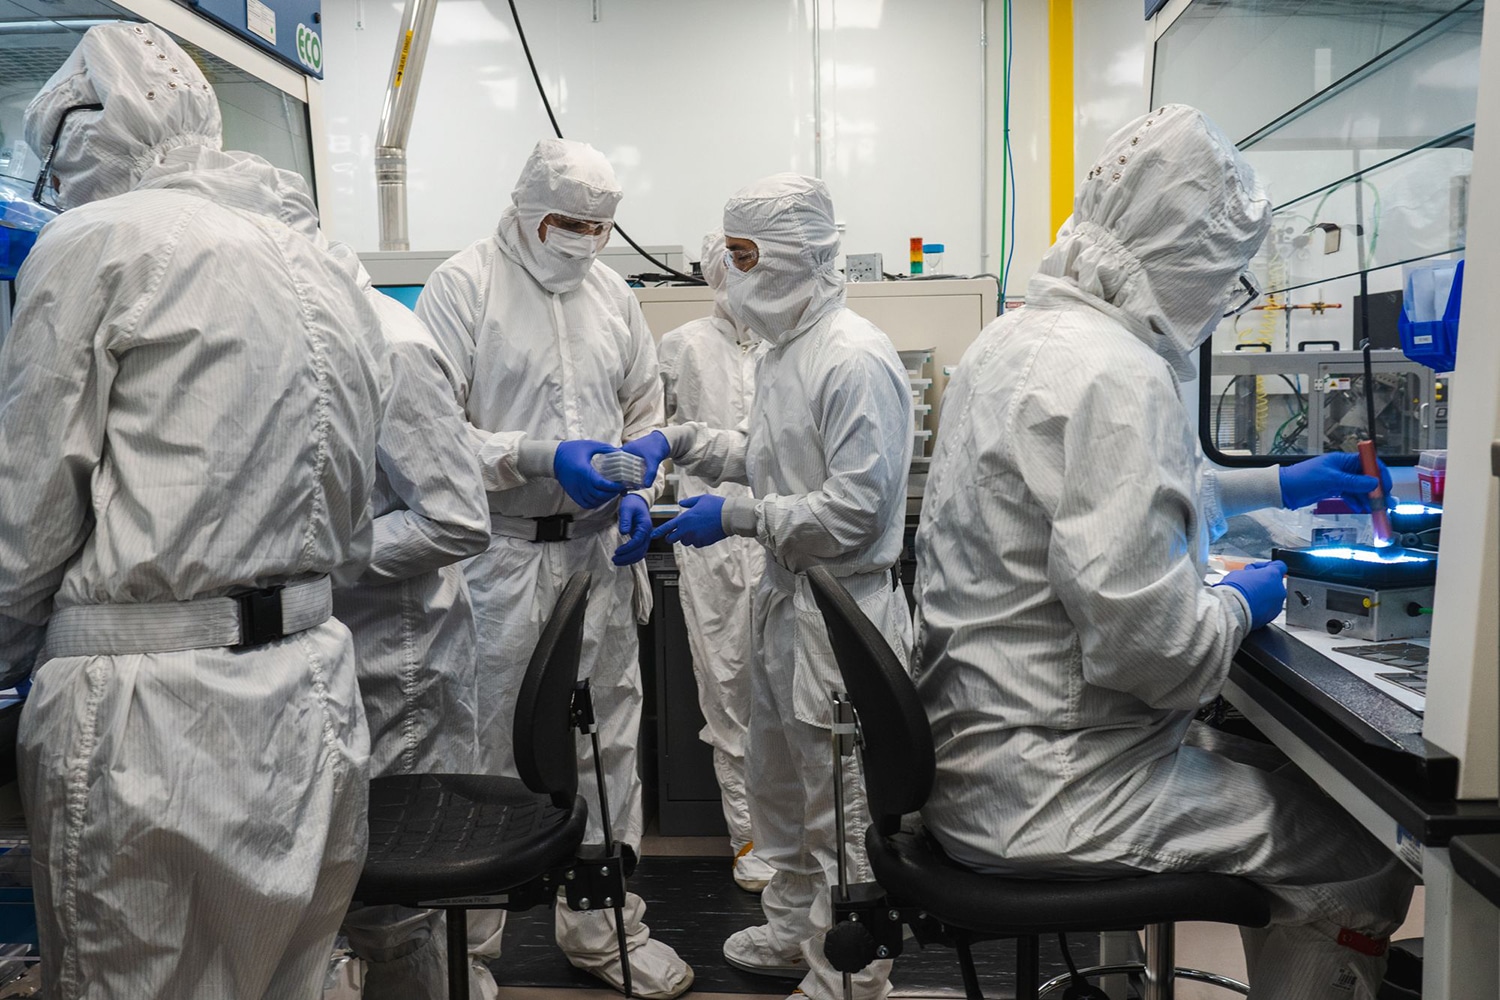 Photograph of lab techs in Personal Protective Equipment